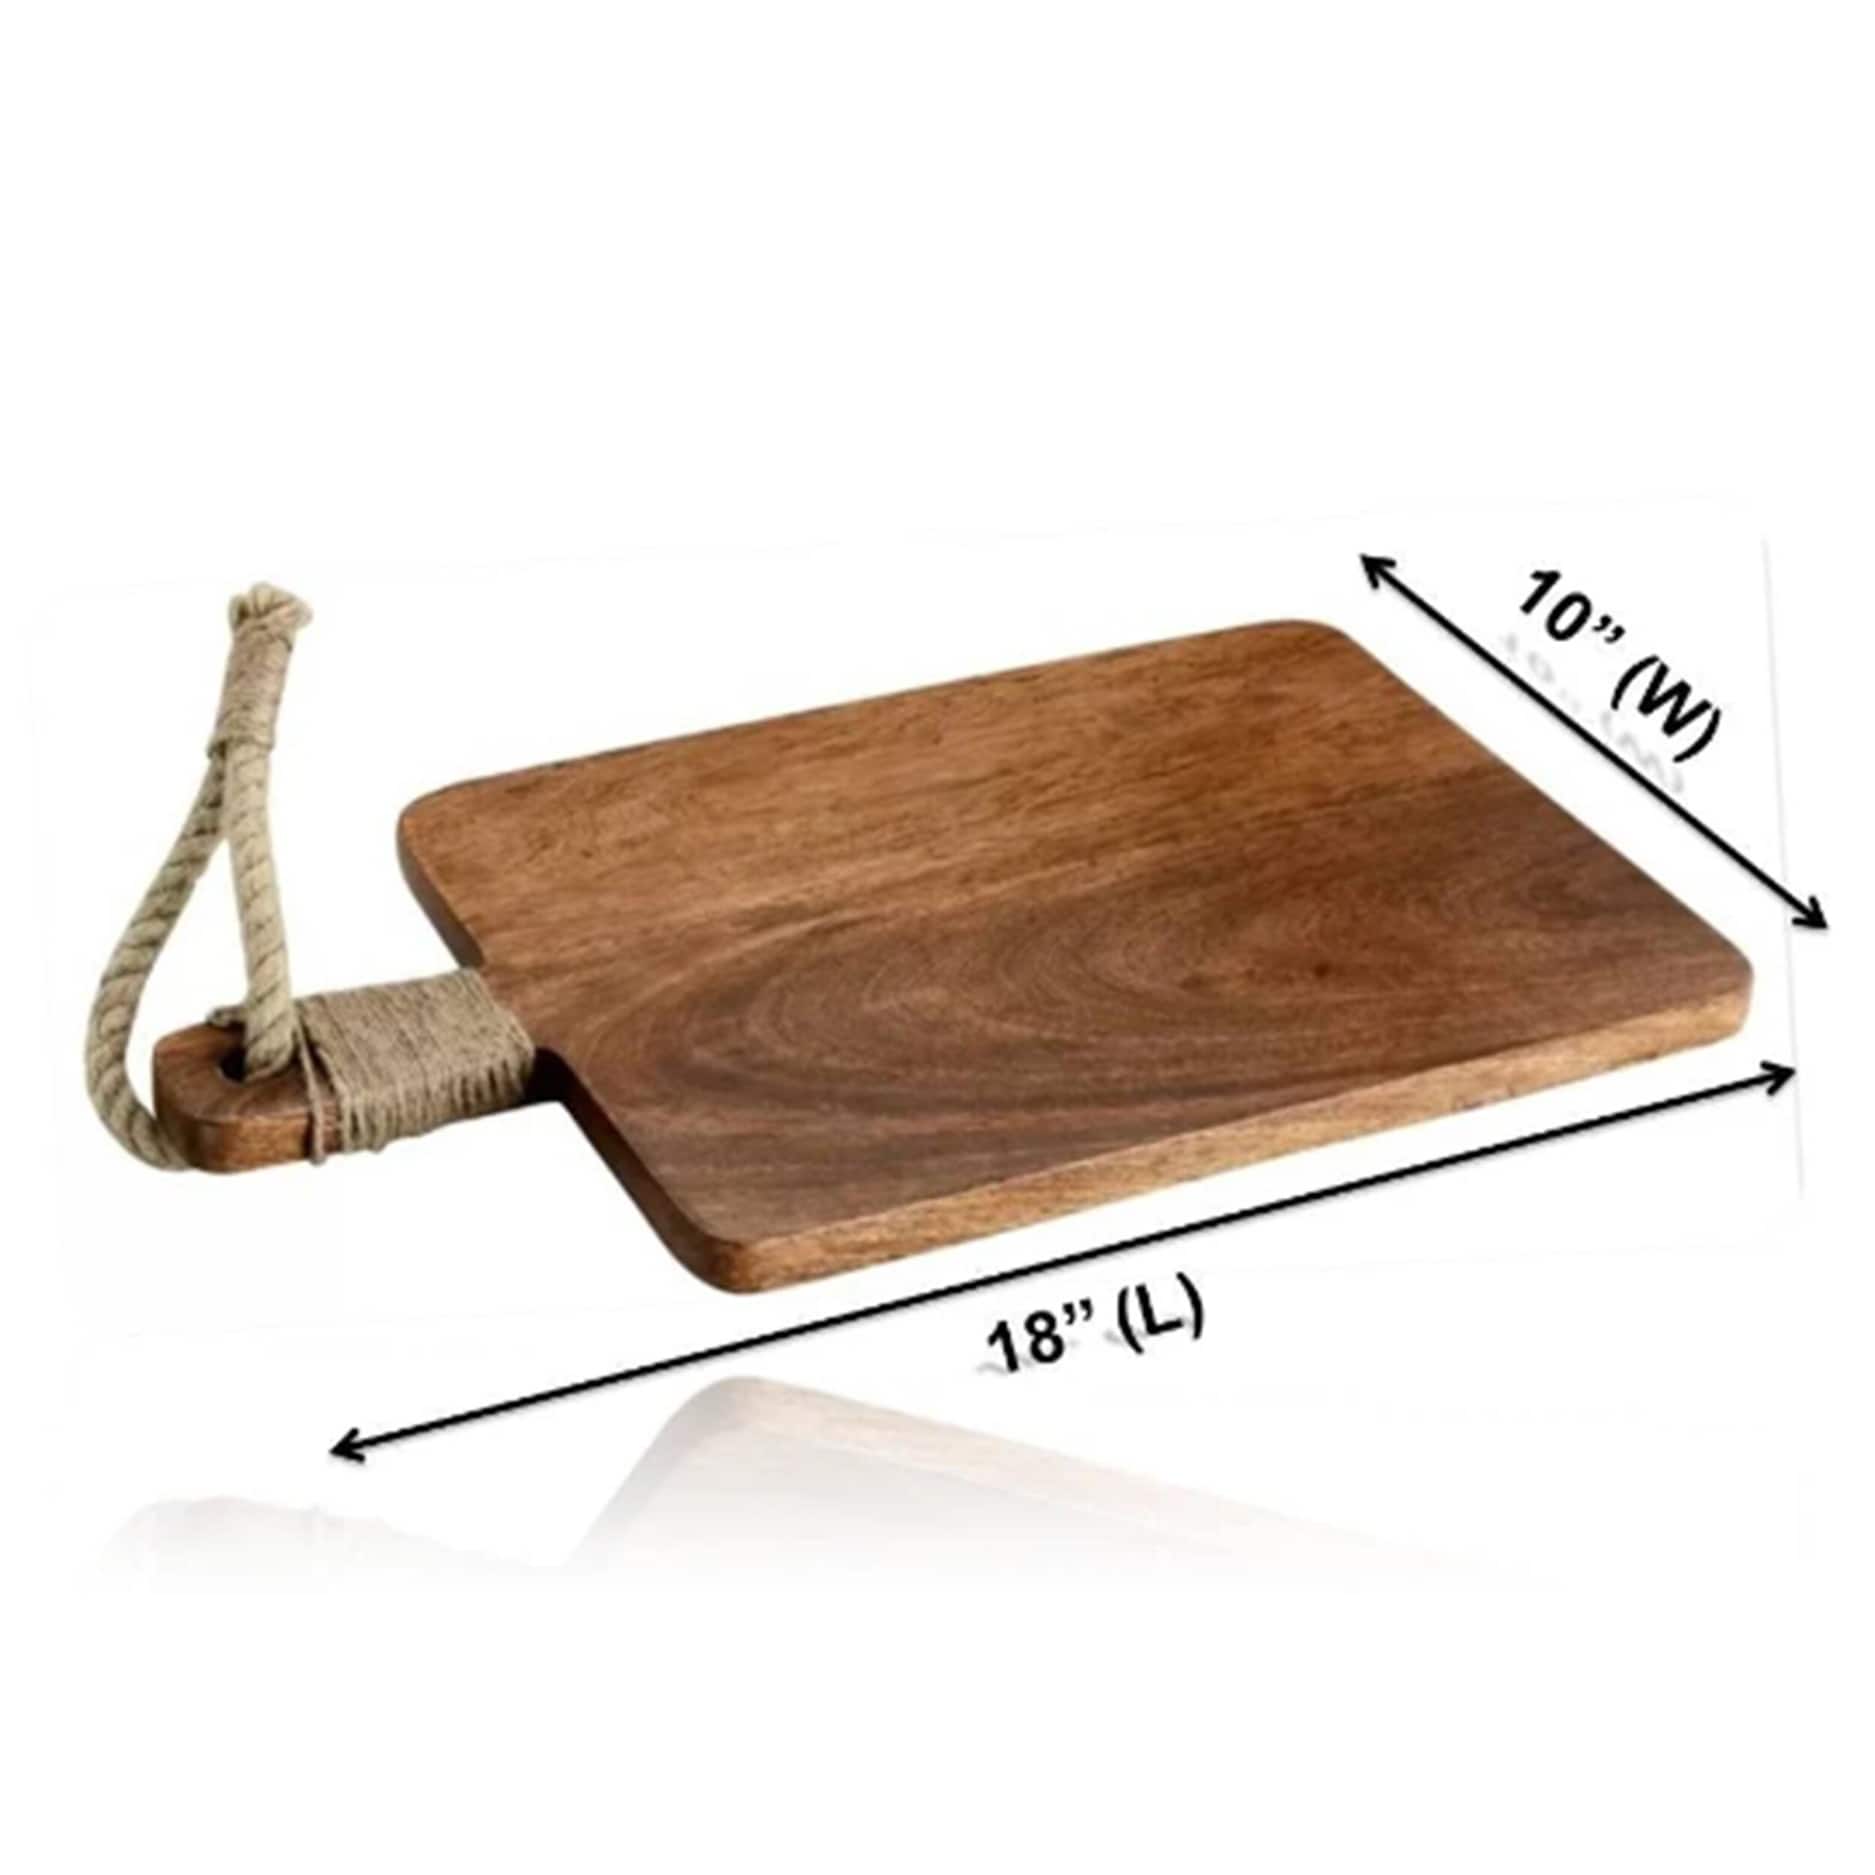 Mascot Hardware Everyday Wooden Cutting Board With Tied Rope - On Sale ...